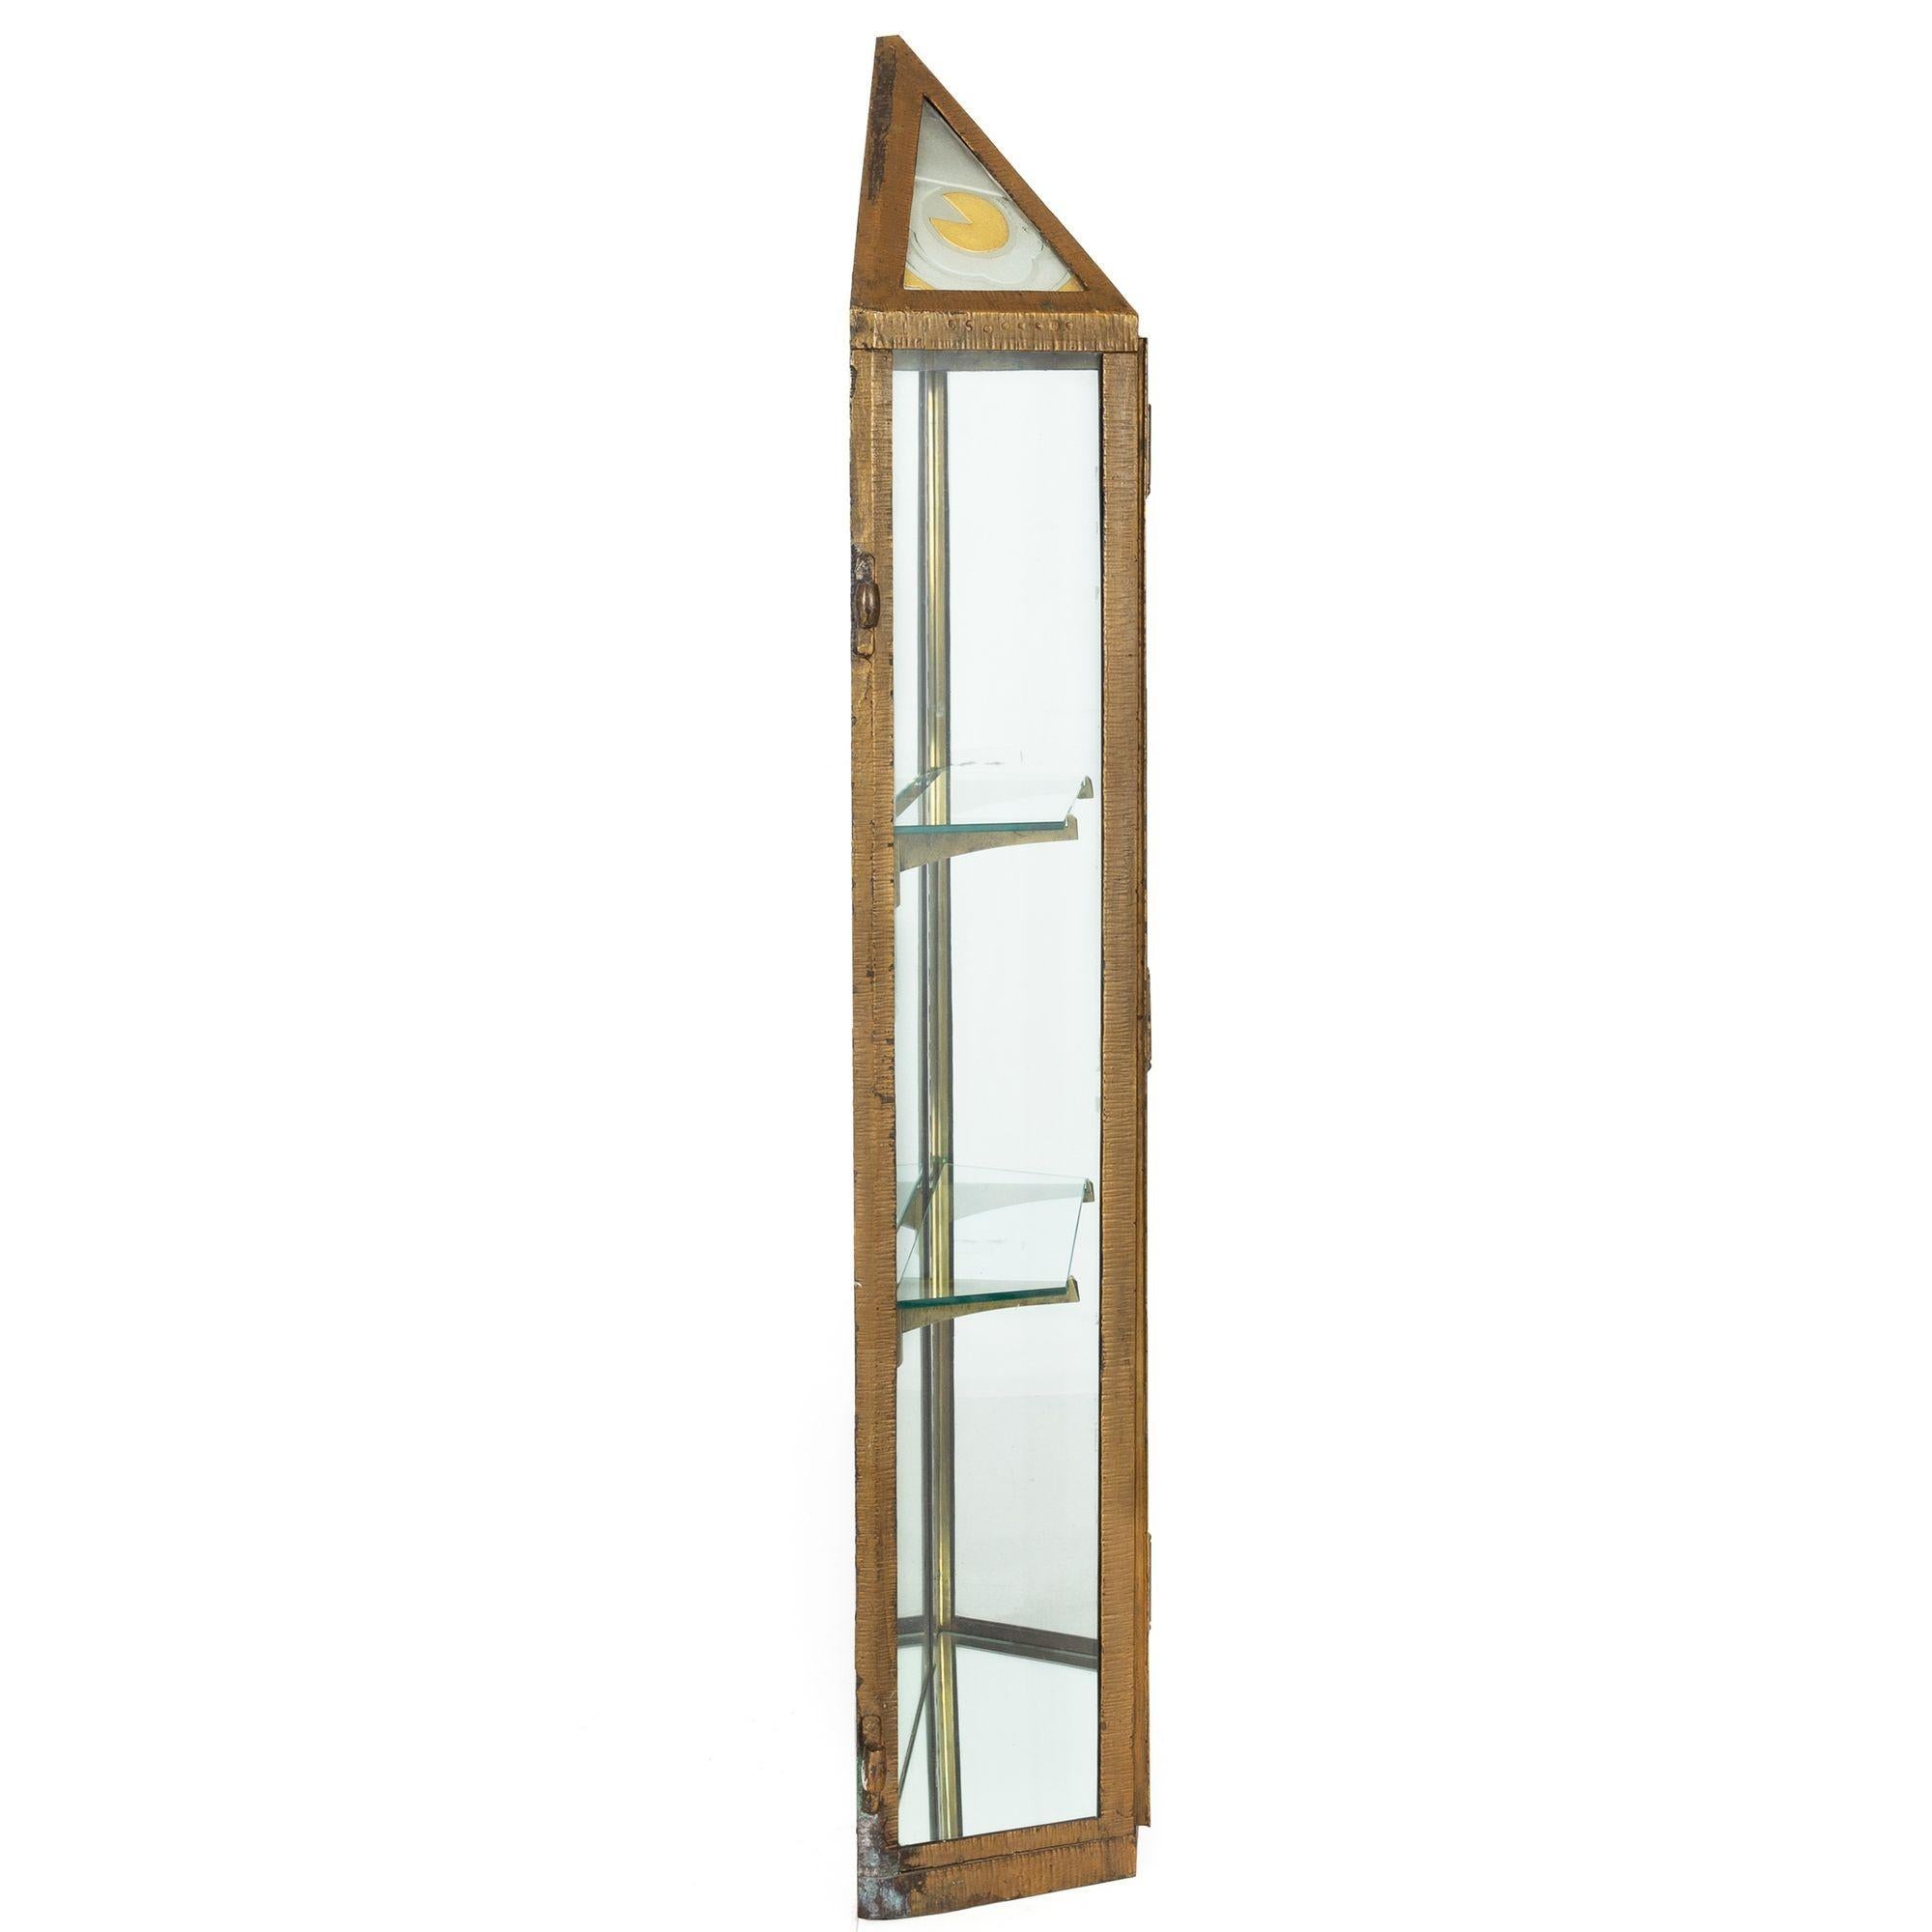 20th Century French Art Deco Antique Hanging Display Cabinet Vitrine, circa 1930s For Sale